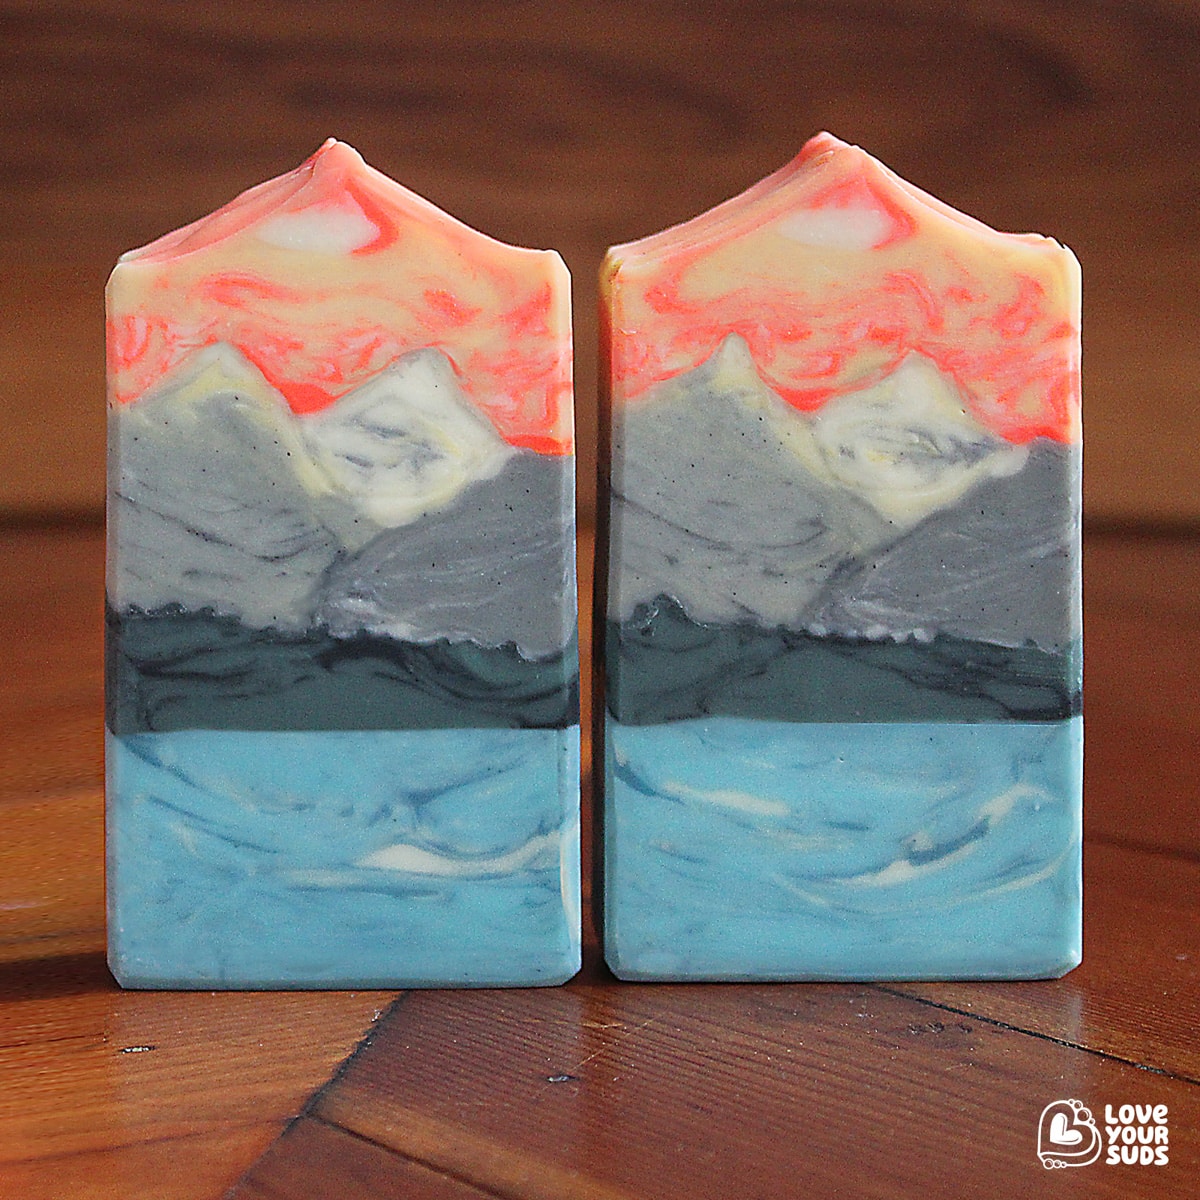 soap landscape with water and mountains.